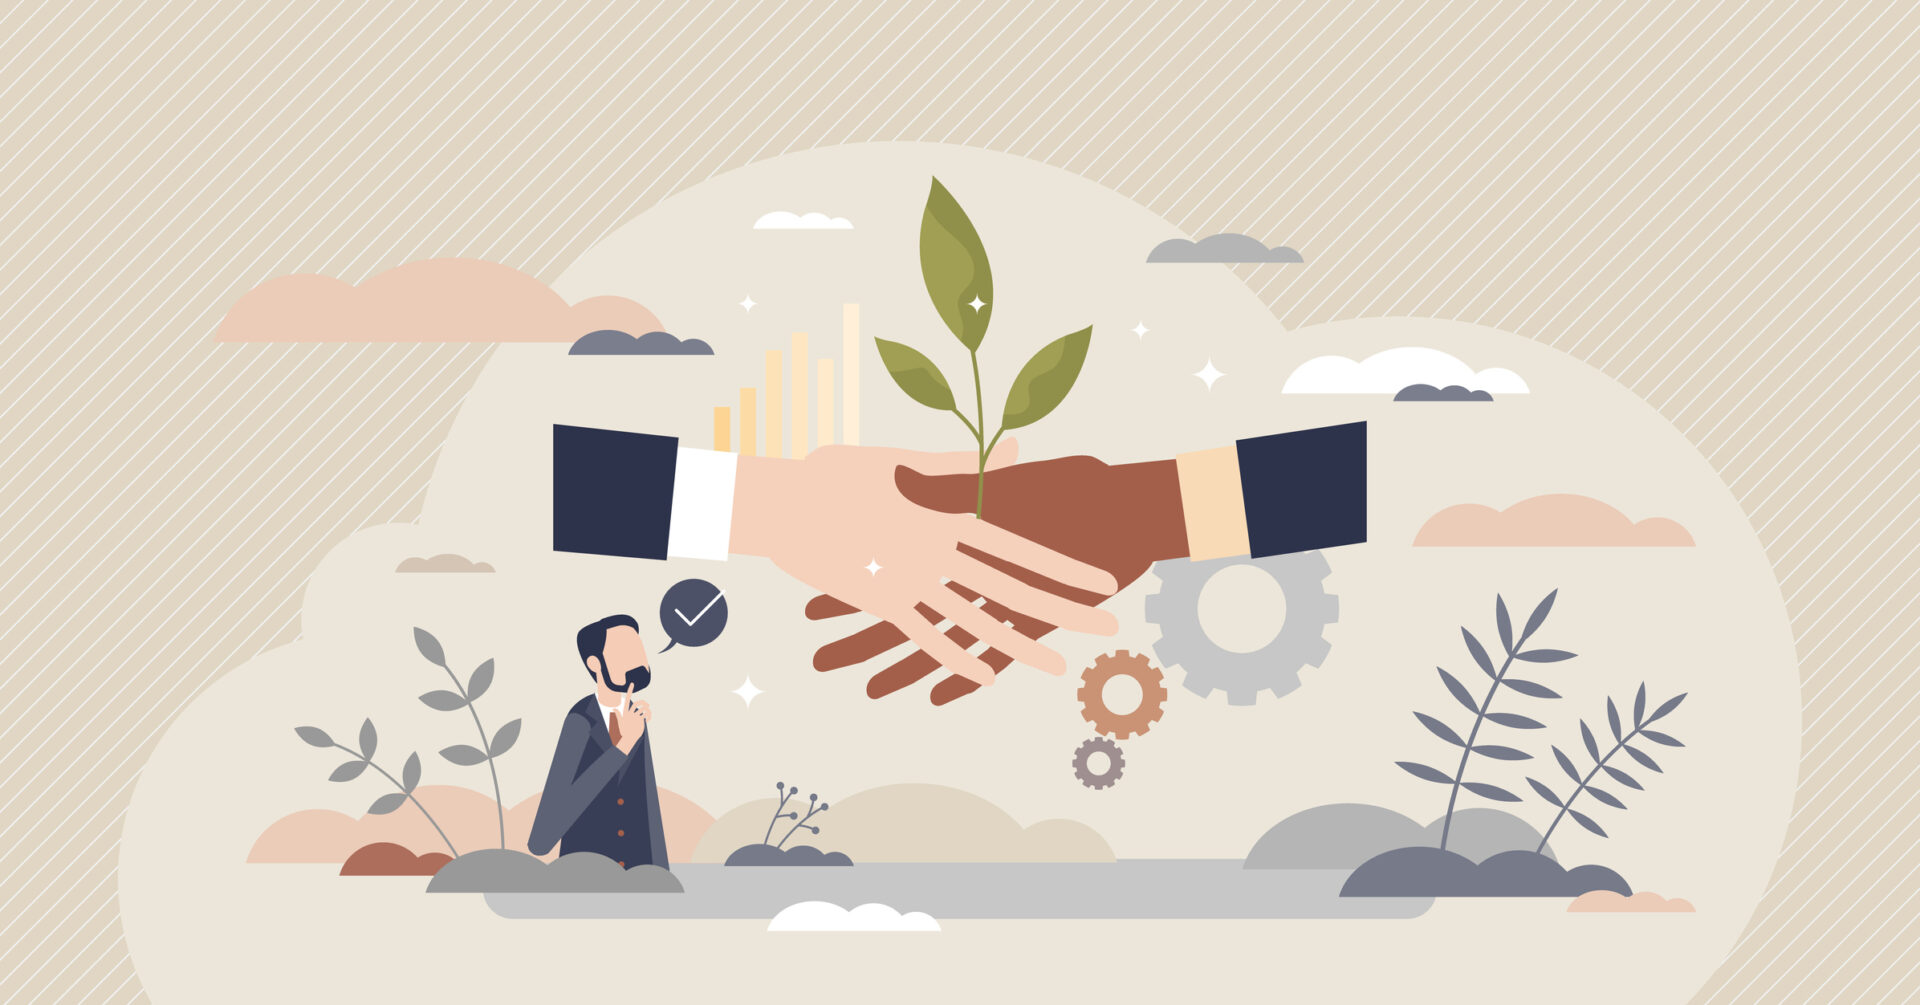 Sustainable partner and environmental friendly business tiny person concept. Corporate deal or agreement symbolic handshake with green leaf vector illustration. Climate awareness in company strategy.